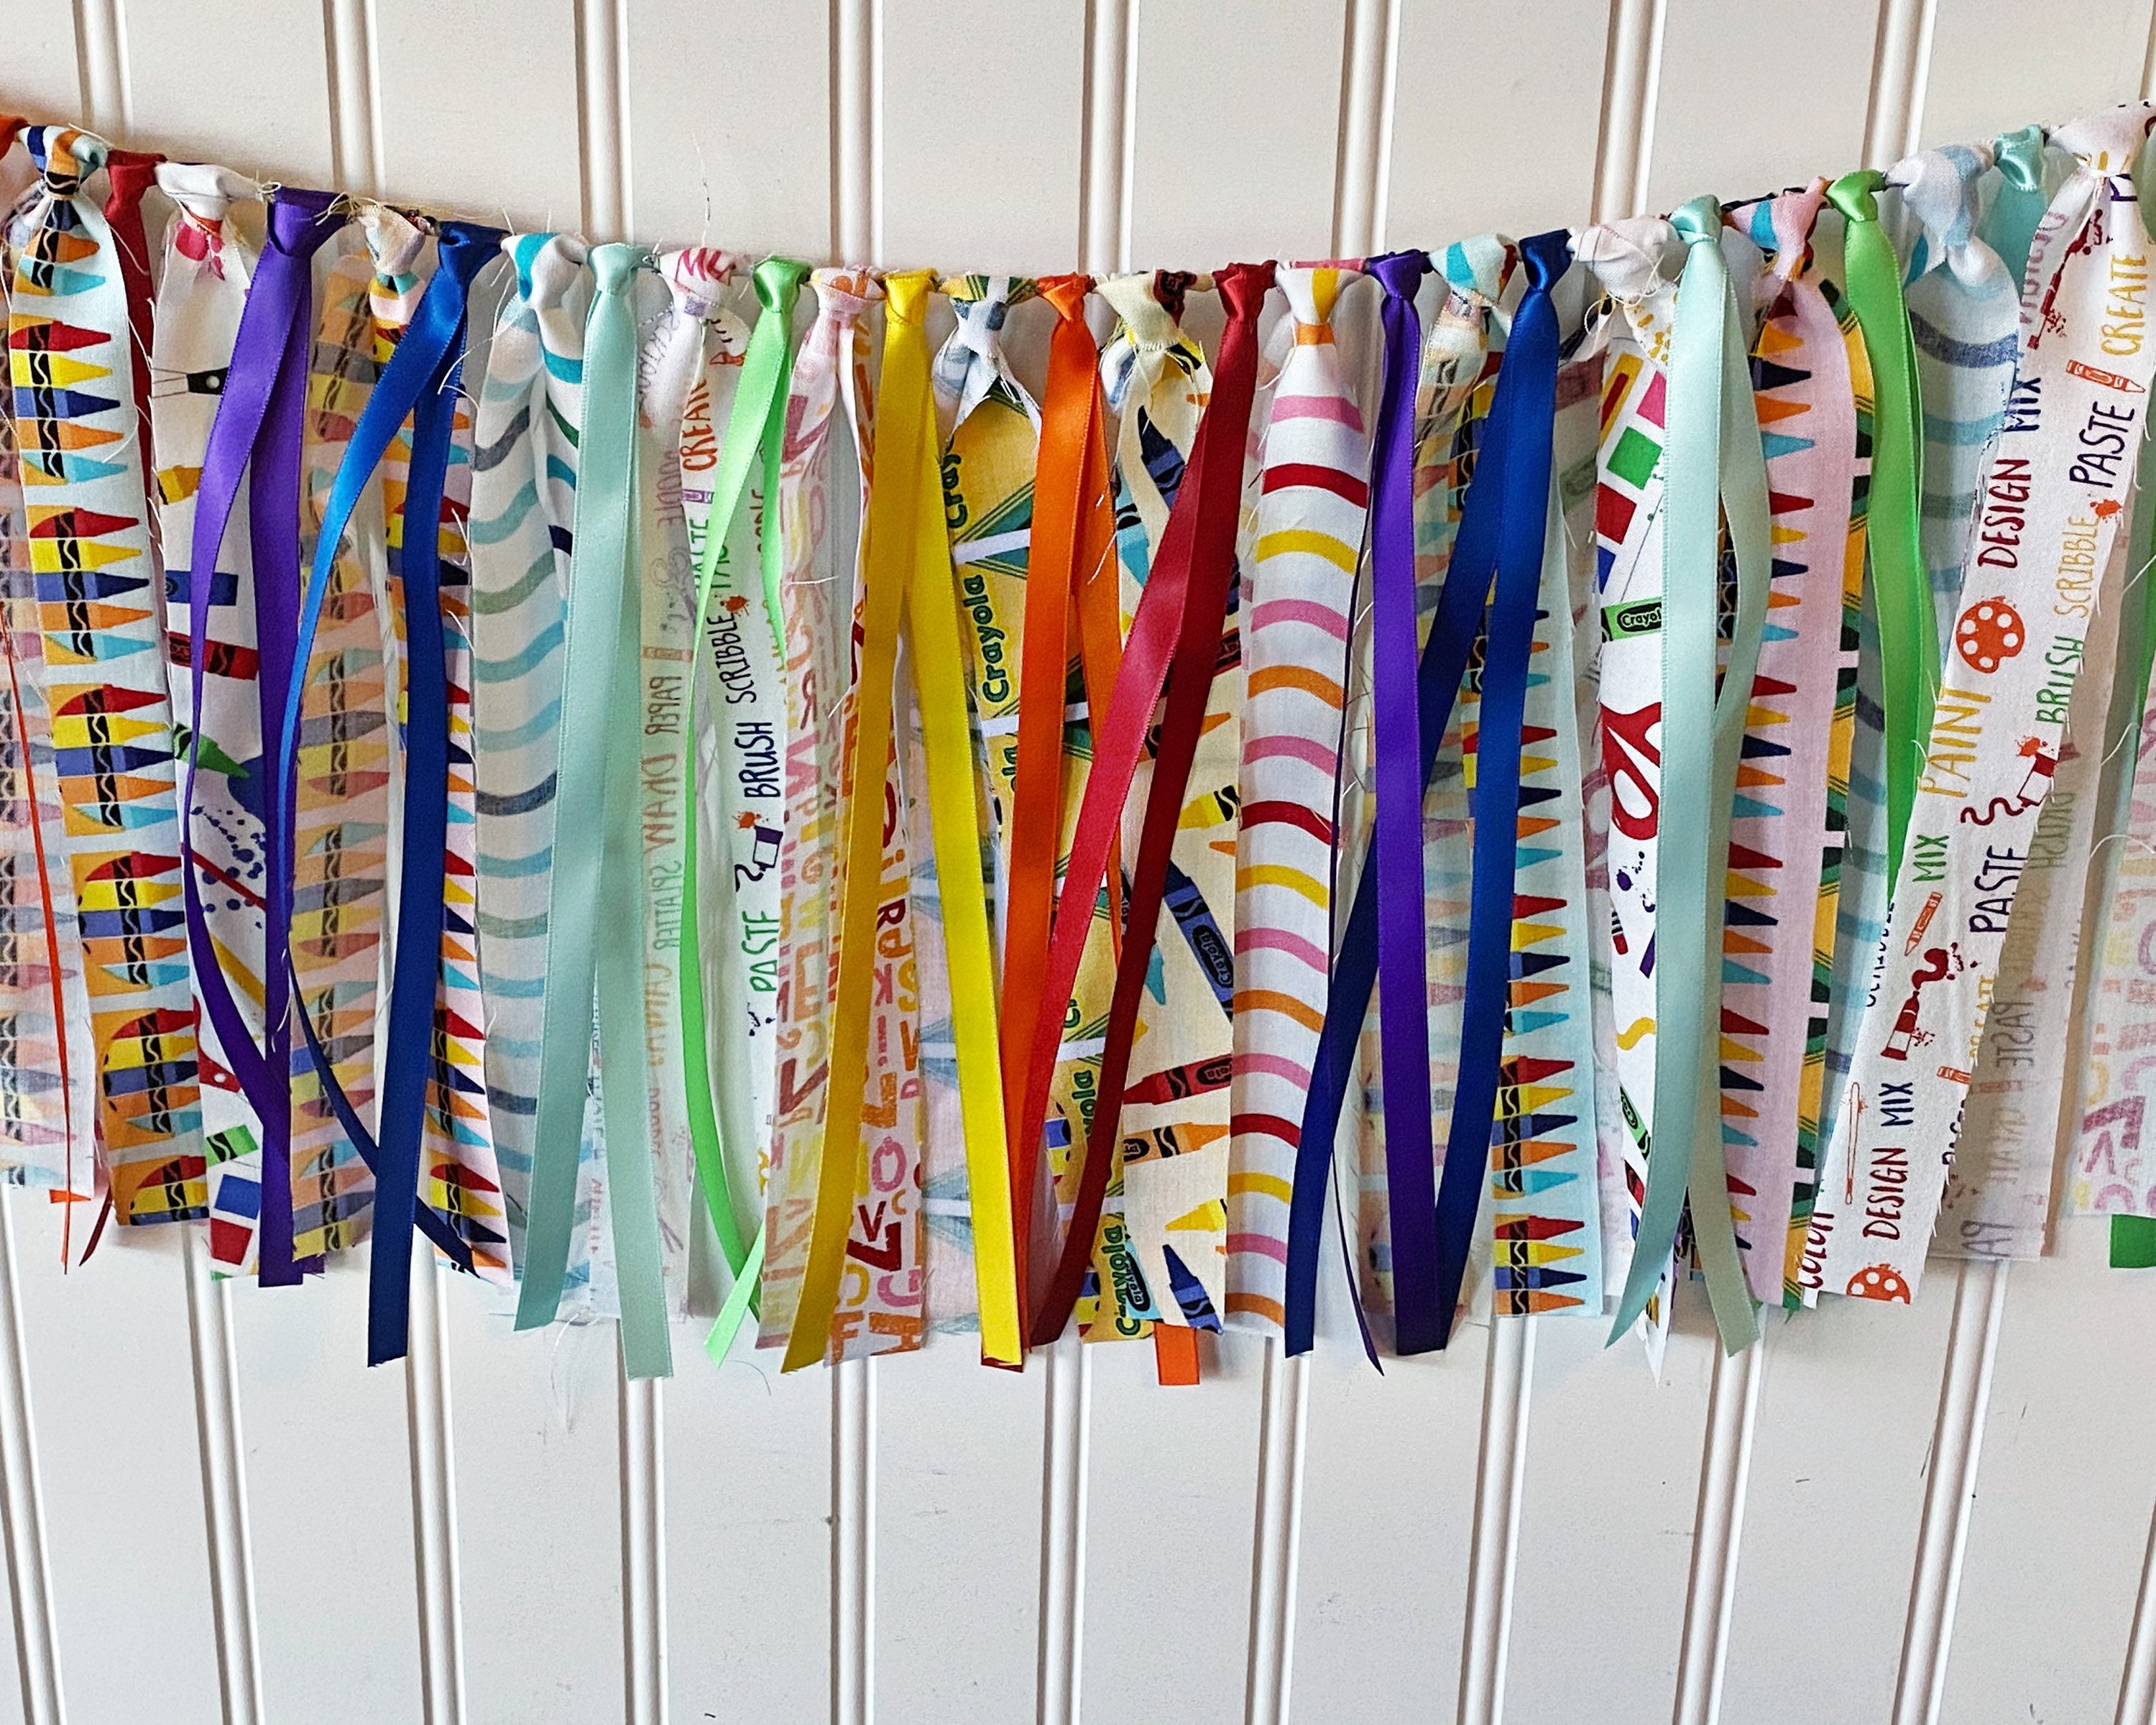 Happy 100th Day Of School - 100 Days Party Hanging Decor - Party Decoration  Swirls - Set Of 40